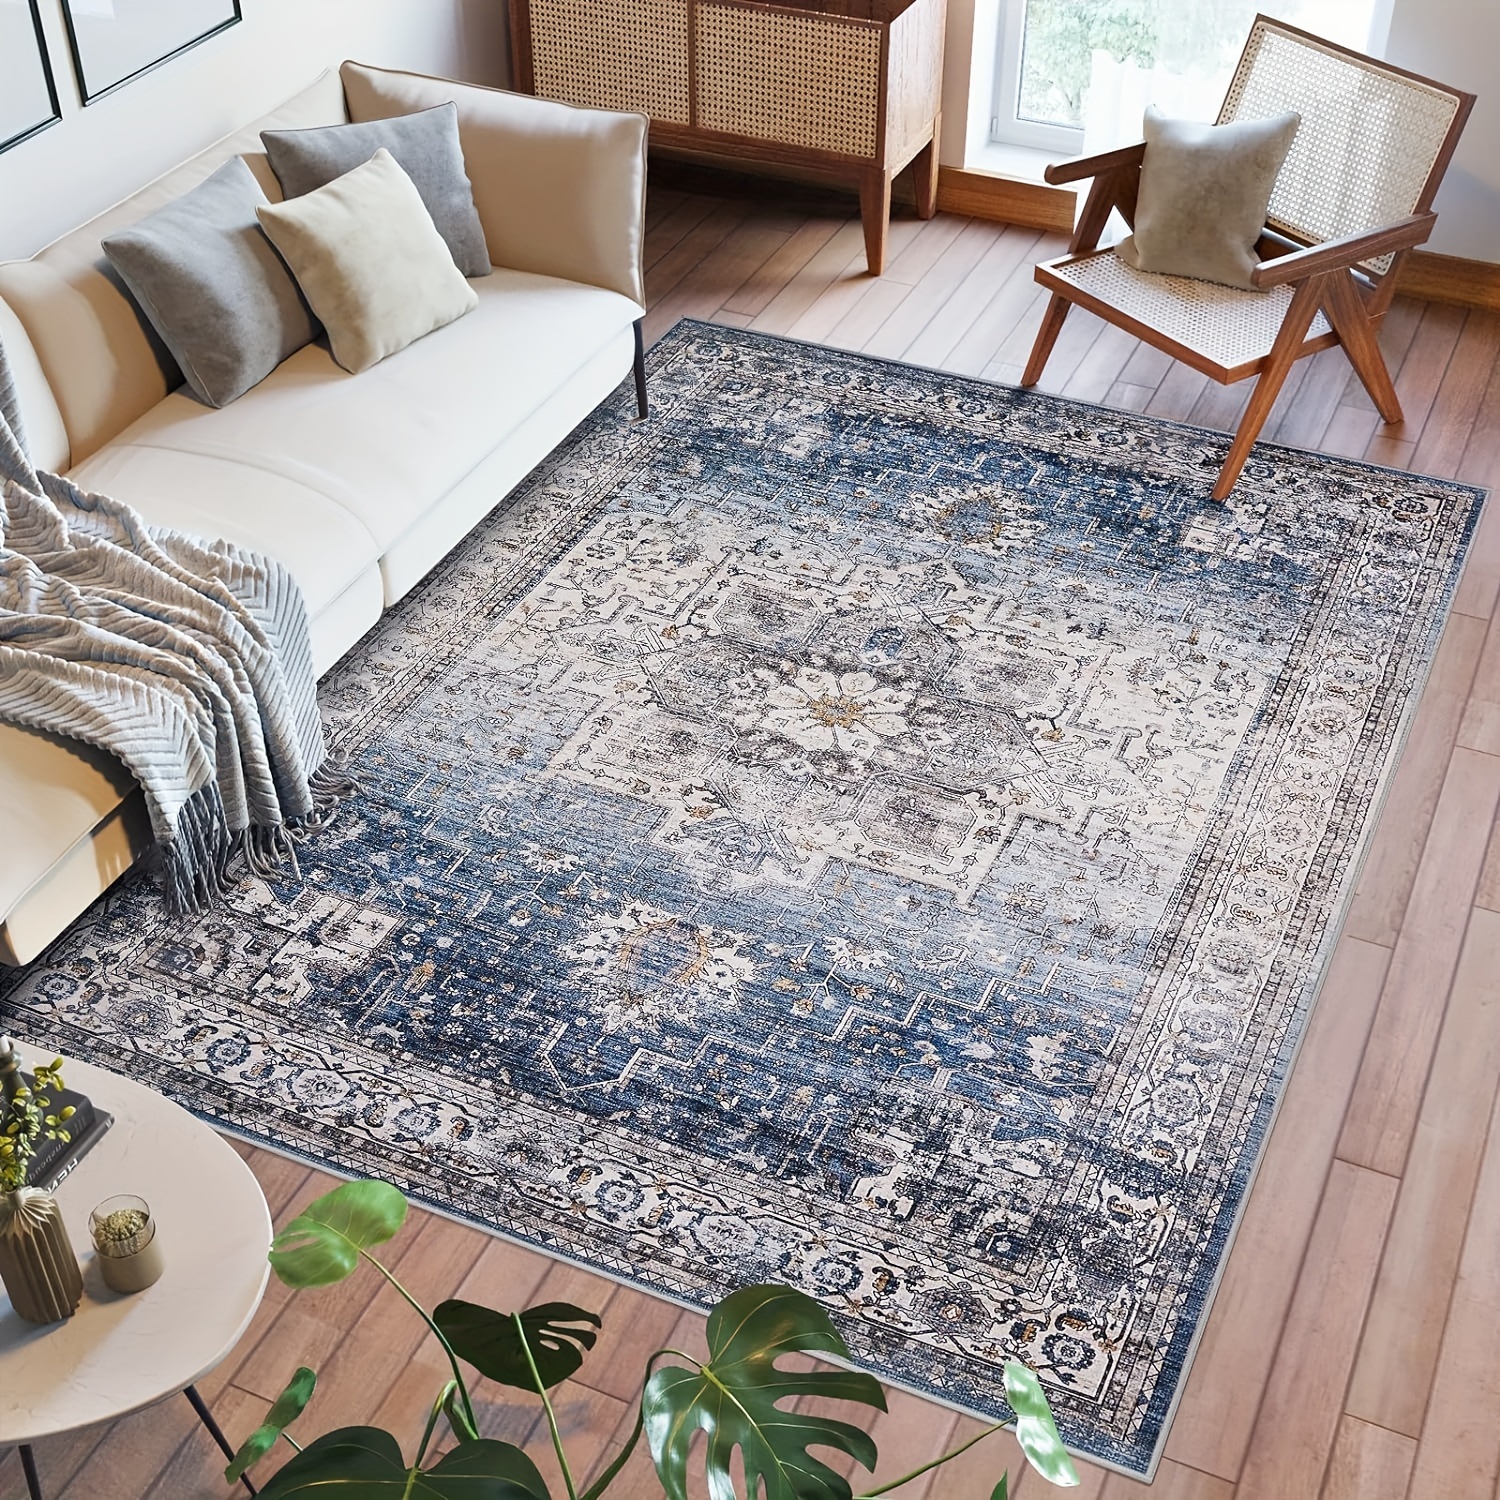 

Soft Large Washable Rugs Area Rug 9x12 Living Room: Rugs With Non-slip Rubber Backing Stain Resistant Modern Indoor Boho Vintage Carpet For Bedroom Dining Room Home Office- (blue/multi)